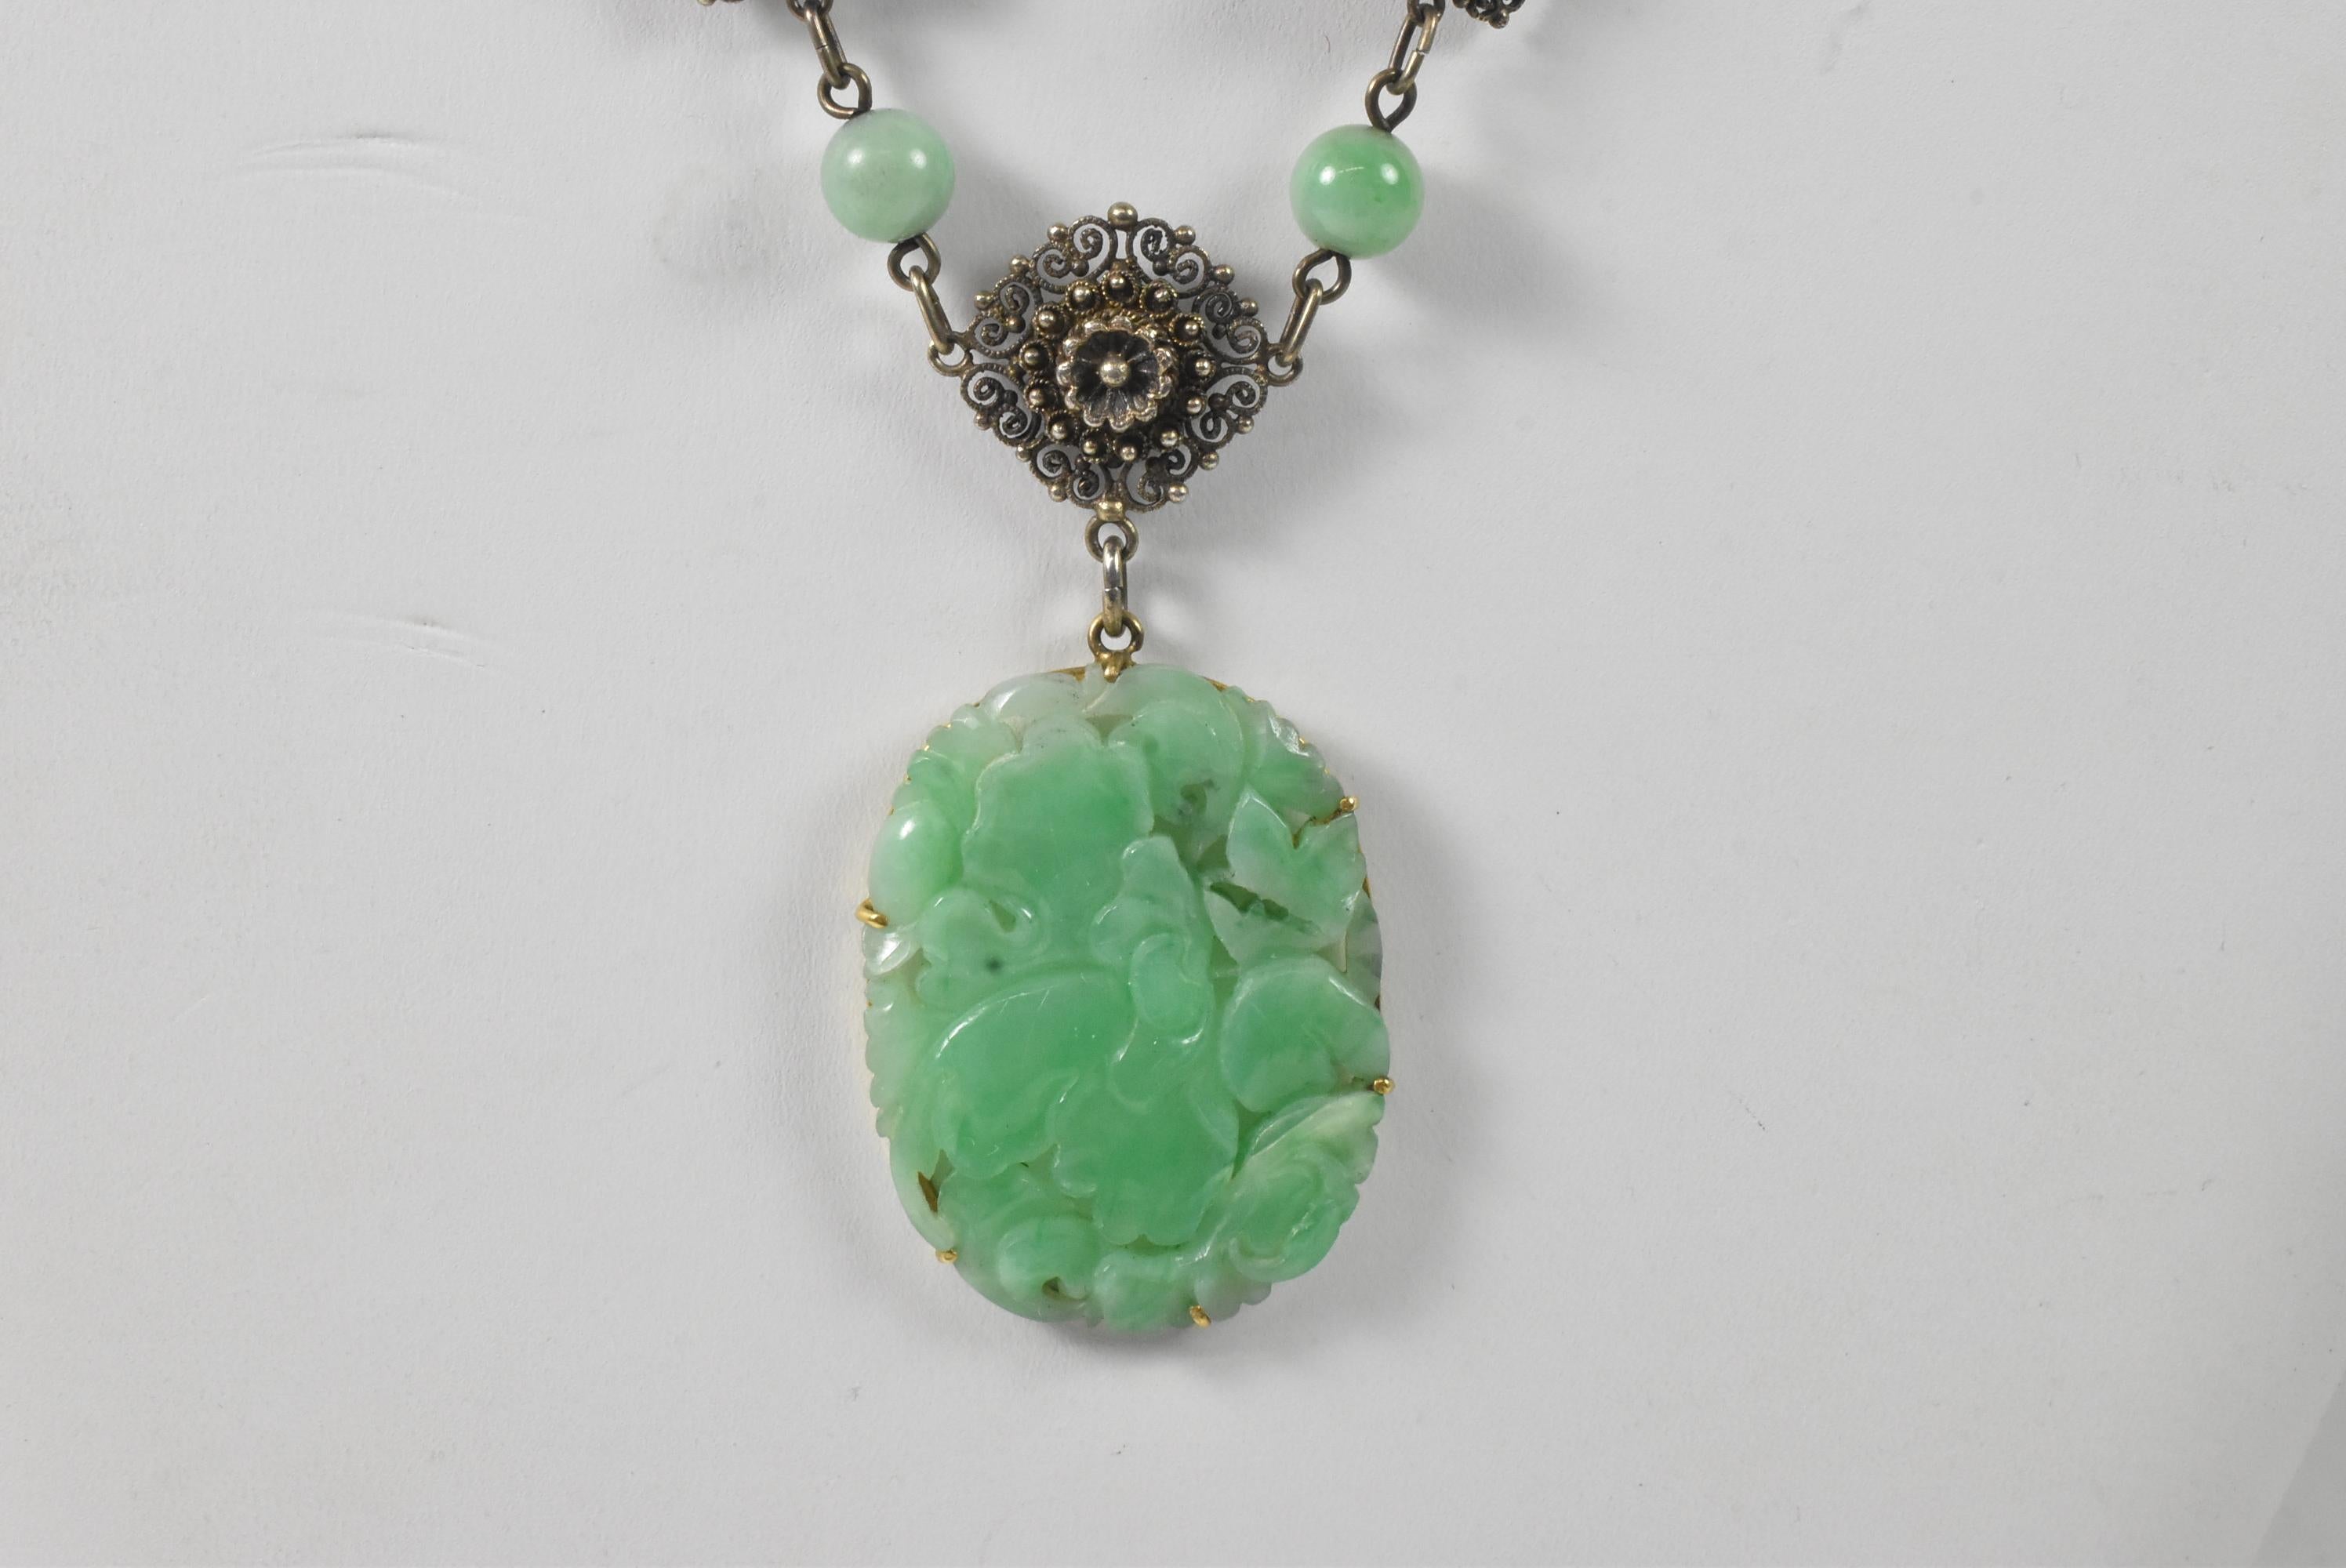 This beautiful antique silver necklace is adorned with an Asian style carved jade pendent. The handmade sterling chain has unusual links and jade beads throughout. The pendent is 38mm x 28mm and the chain is 22